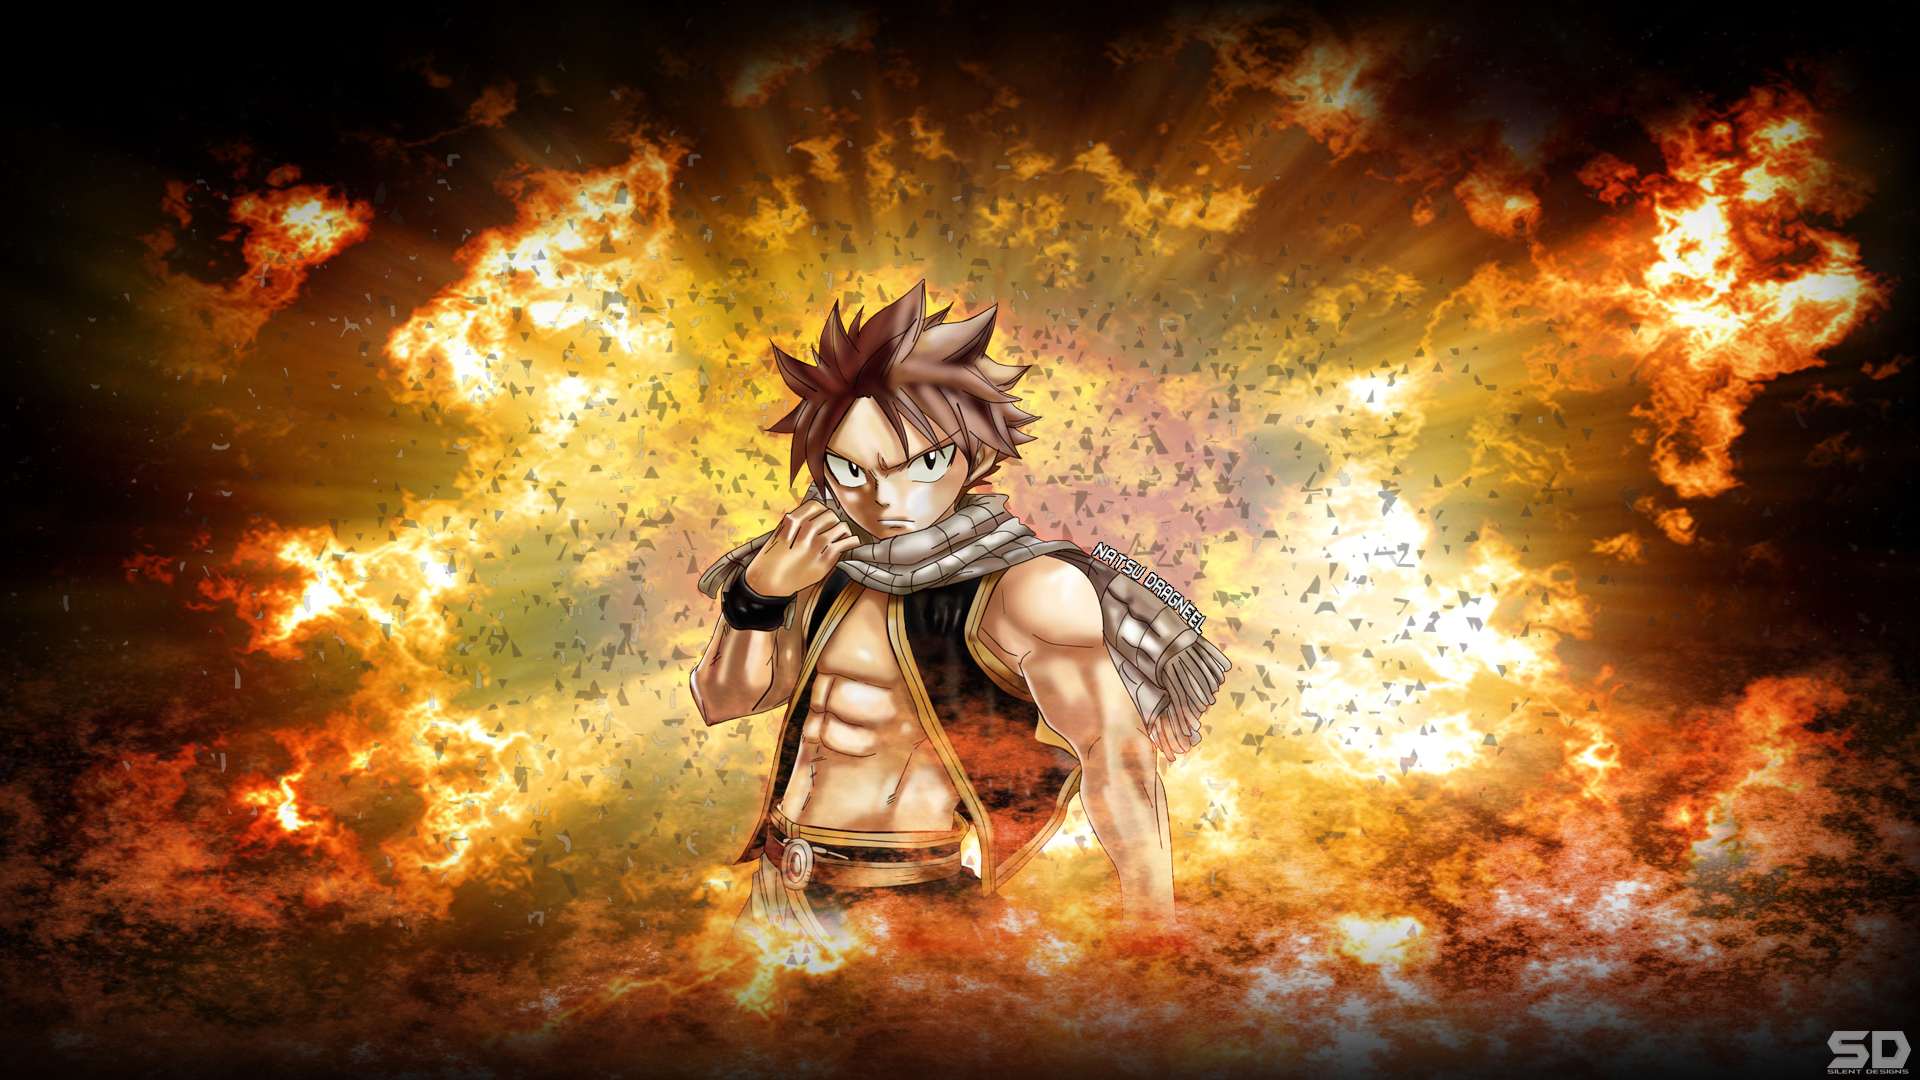 Fairy Tail Wallpaper Natsu Dragneel by Silent  Designs 1920x1080